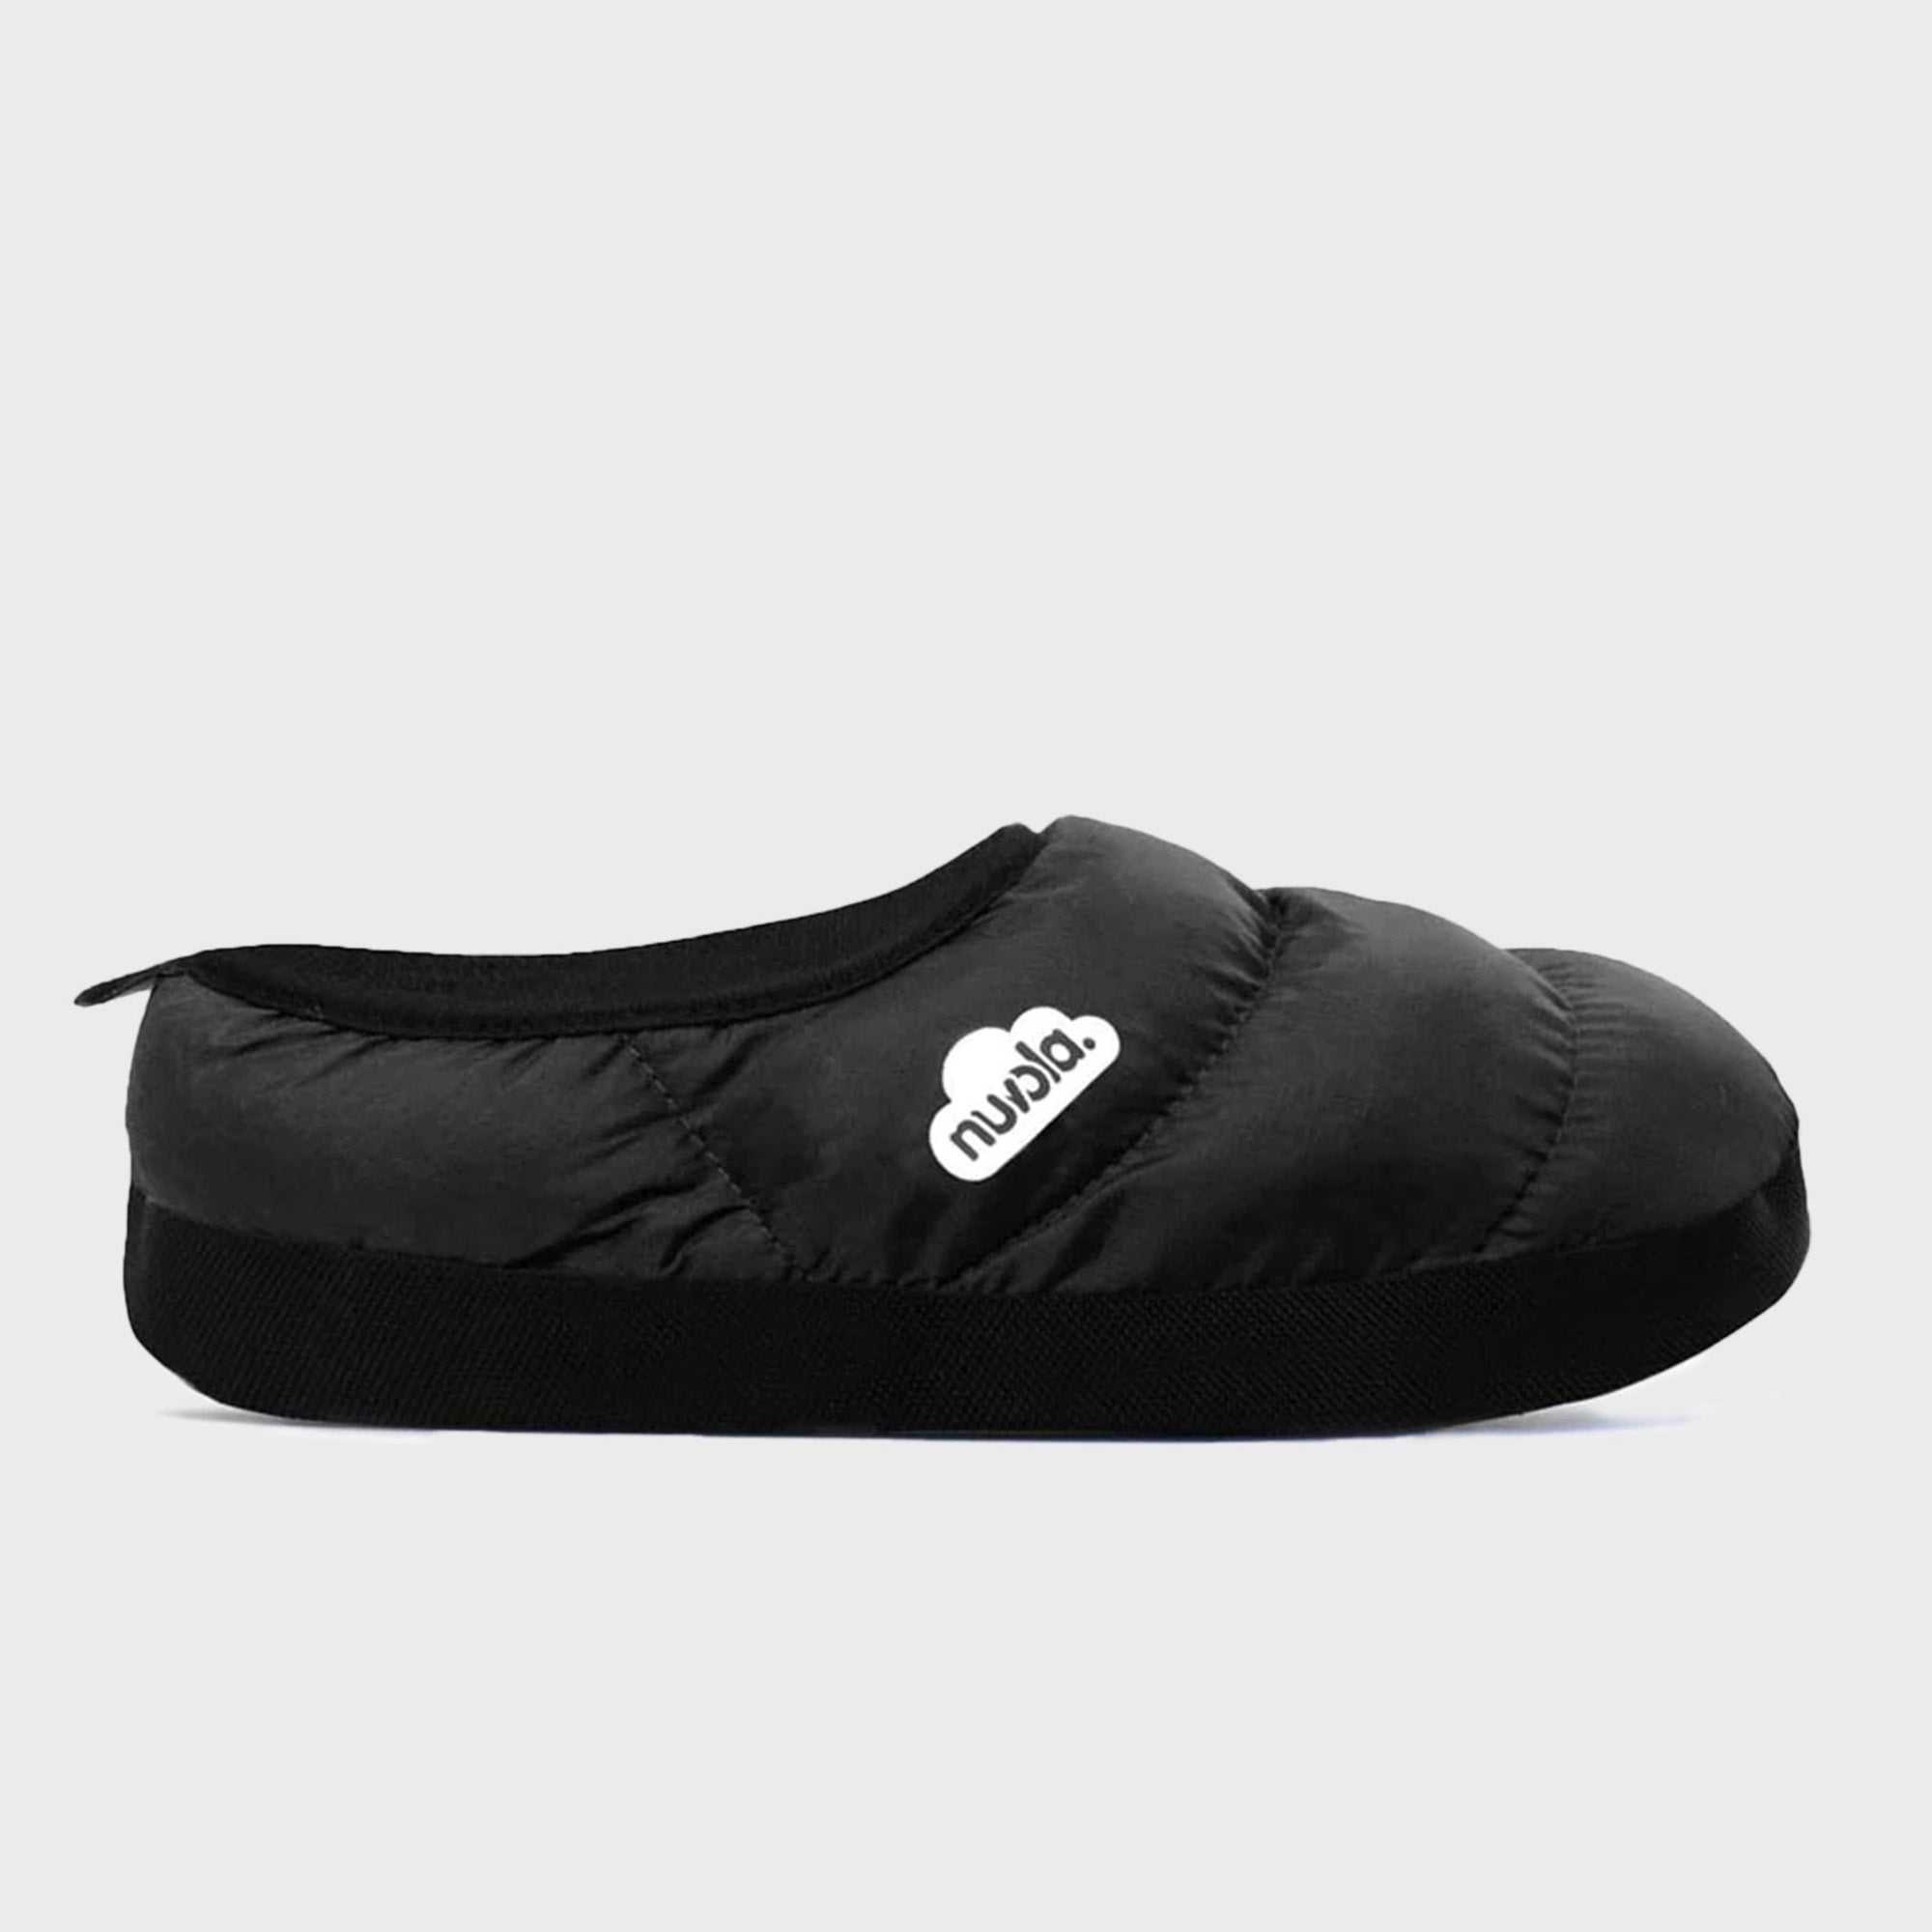 Nuvola Classic Slippers in Black CNCLAG10 FROM EIGHTYWINGOLD - OFFICIAL BRAND PARTNER